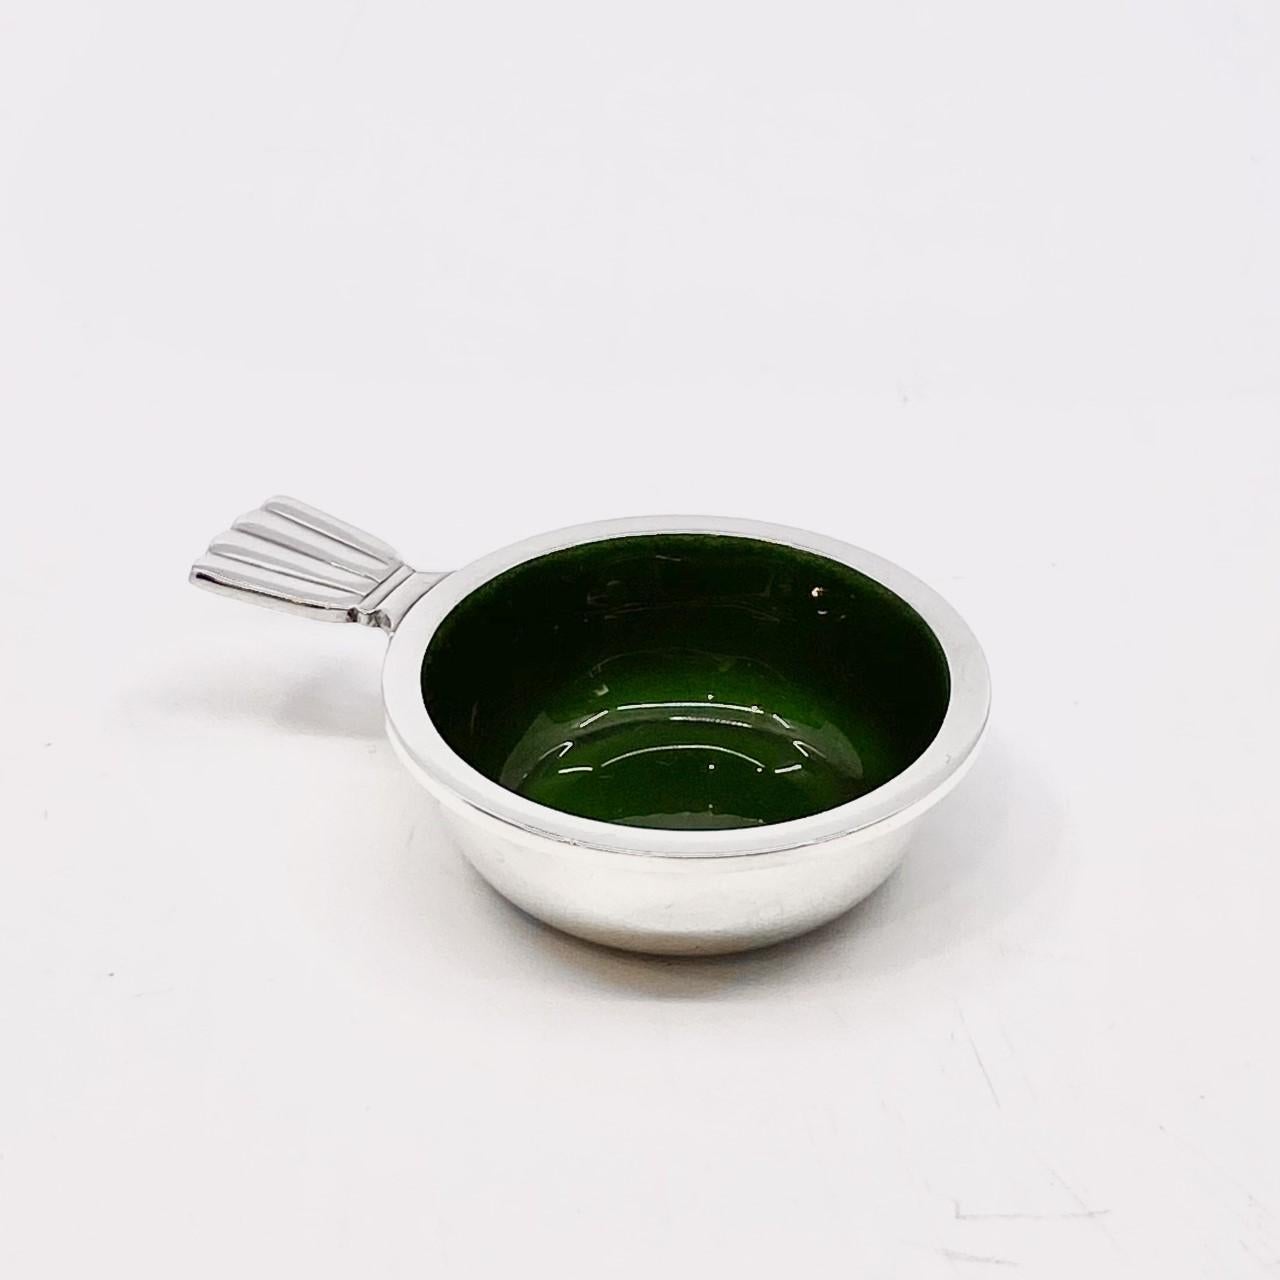 Georg Jensen sterling silver salt cellar with green enamel and salt spoon, items #102 & #103 in the Bernadotte pattern, design #9 by Sigvard Bernadotte from 1939.

Additional information:
Material: Sterling silver
Styles: Art Deco
Hallmarks: With